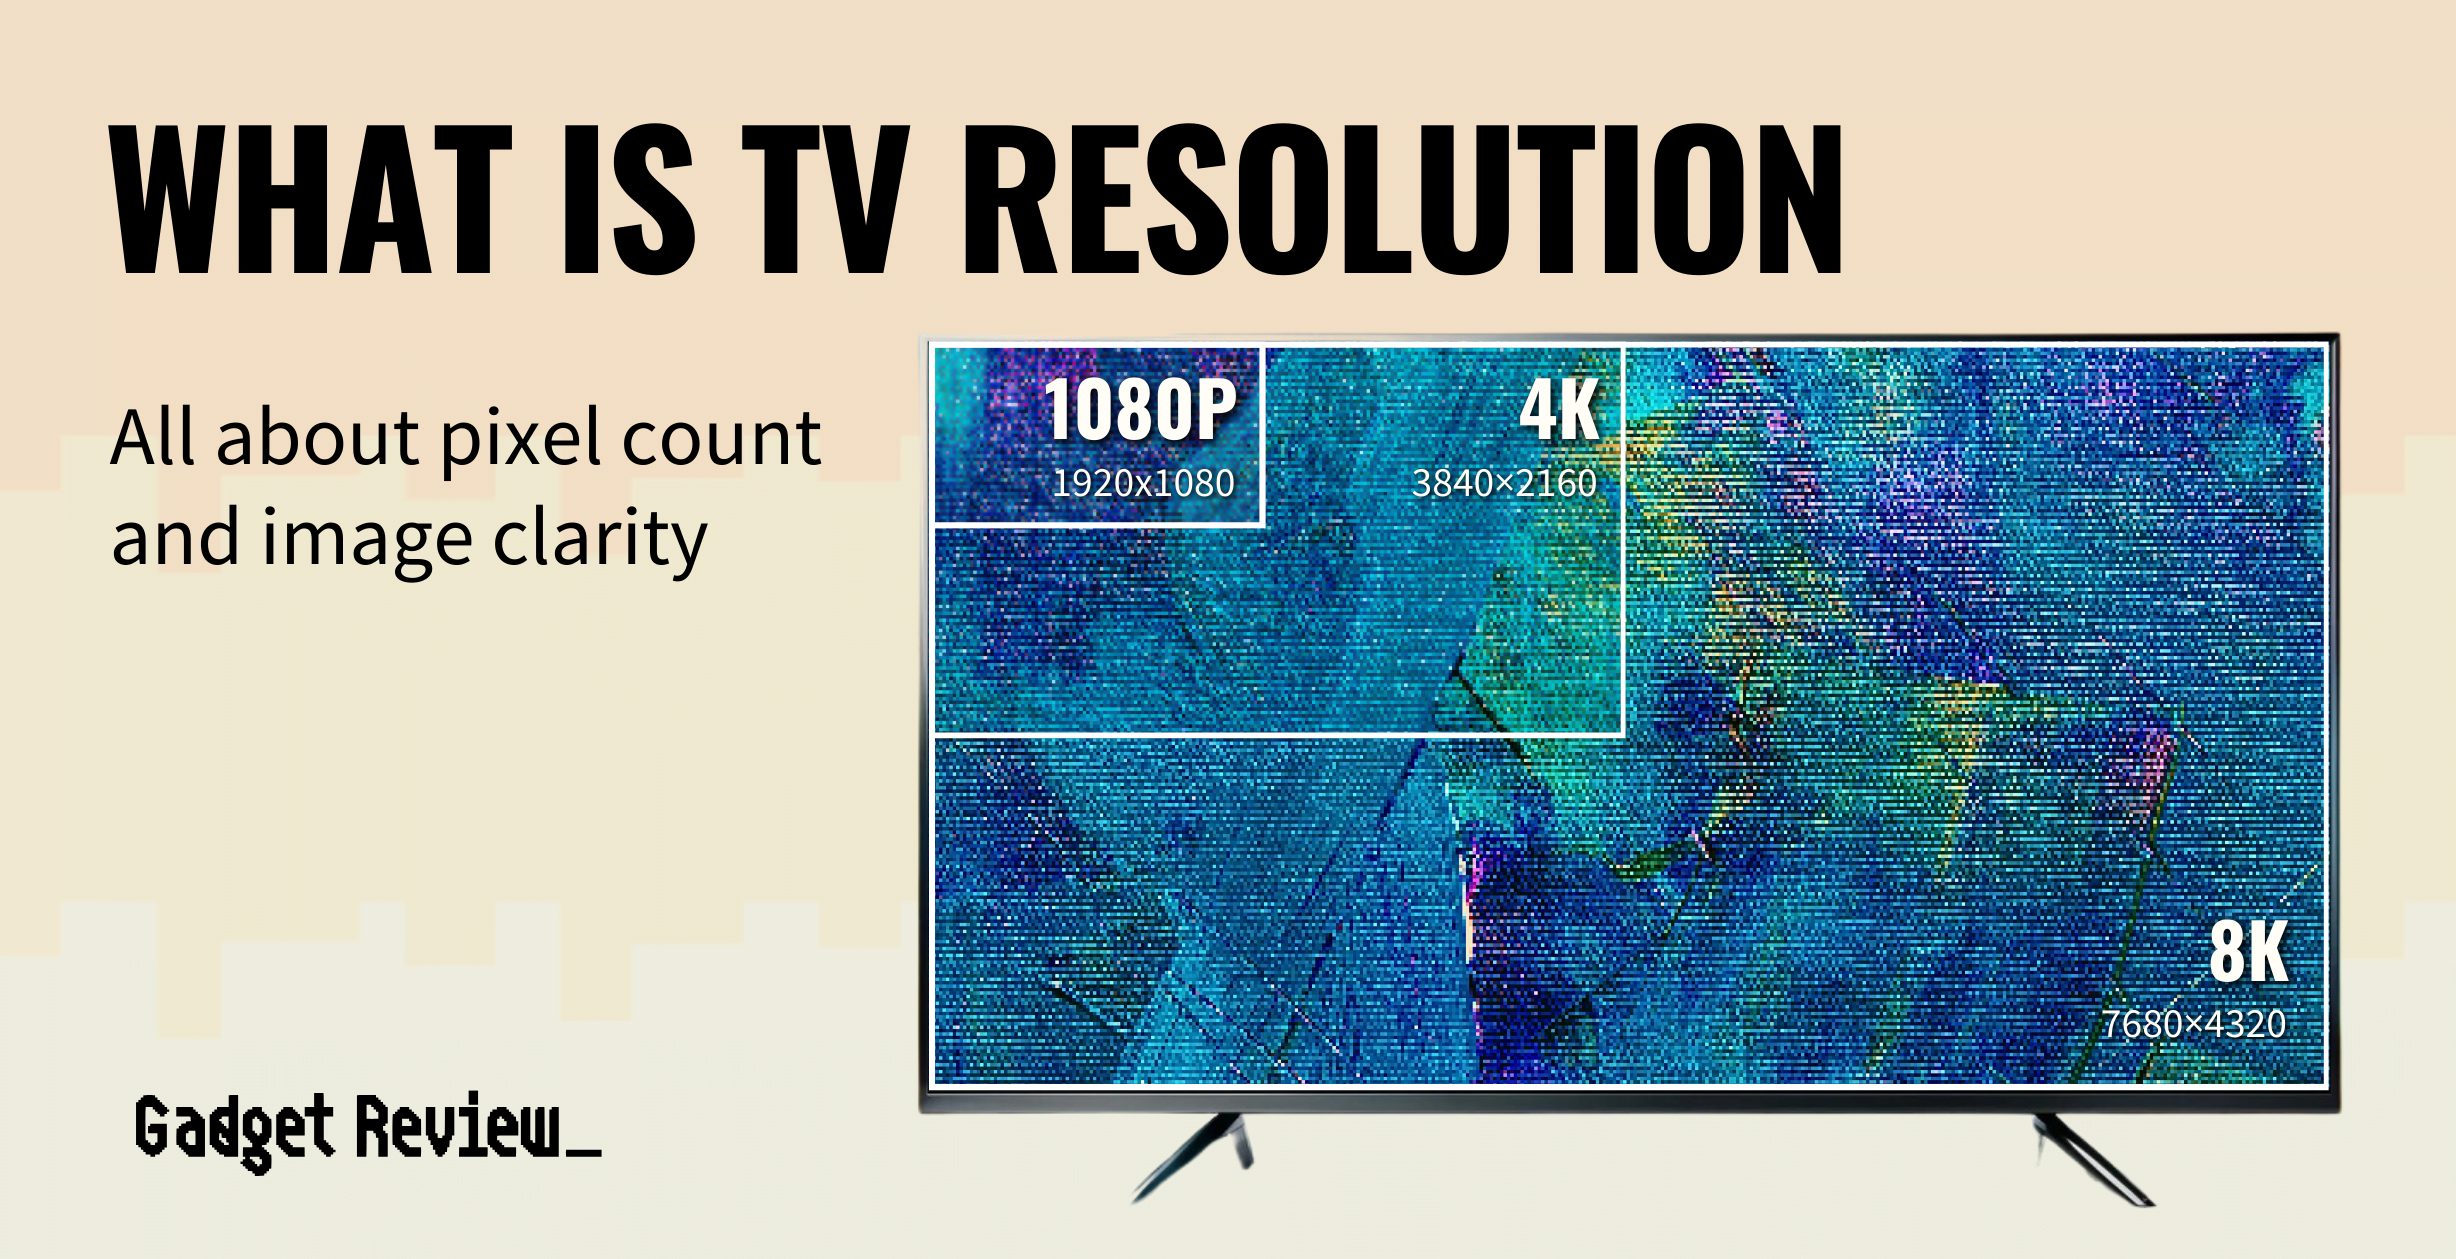 What Is TV Resolution?